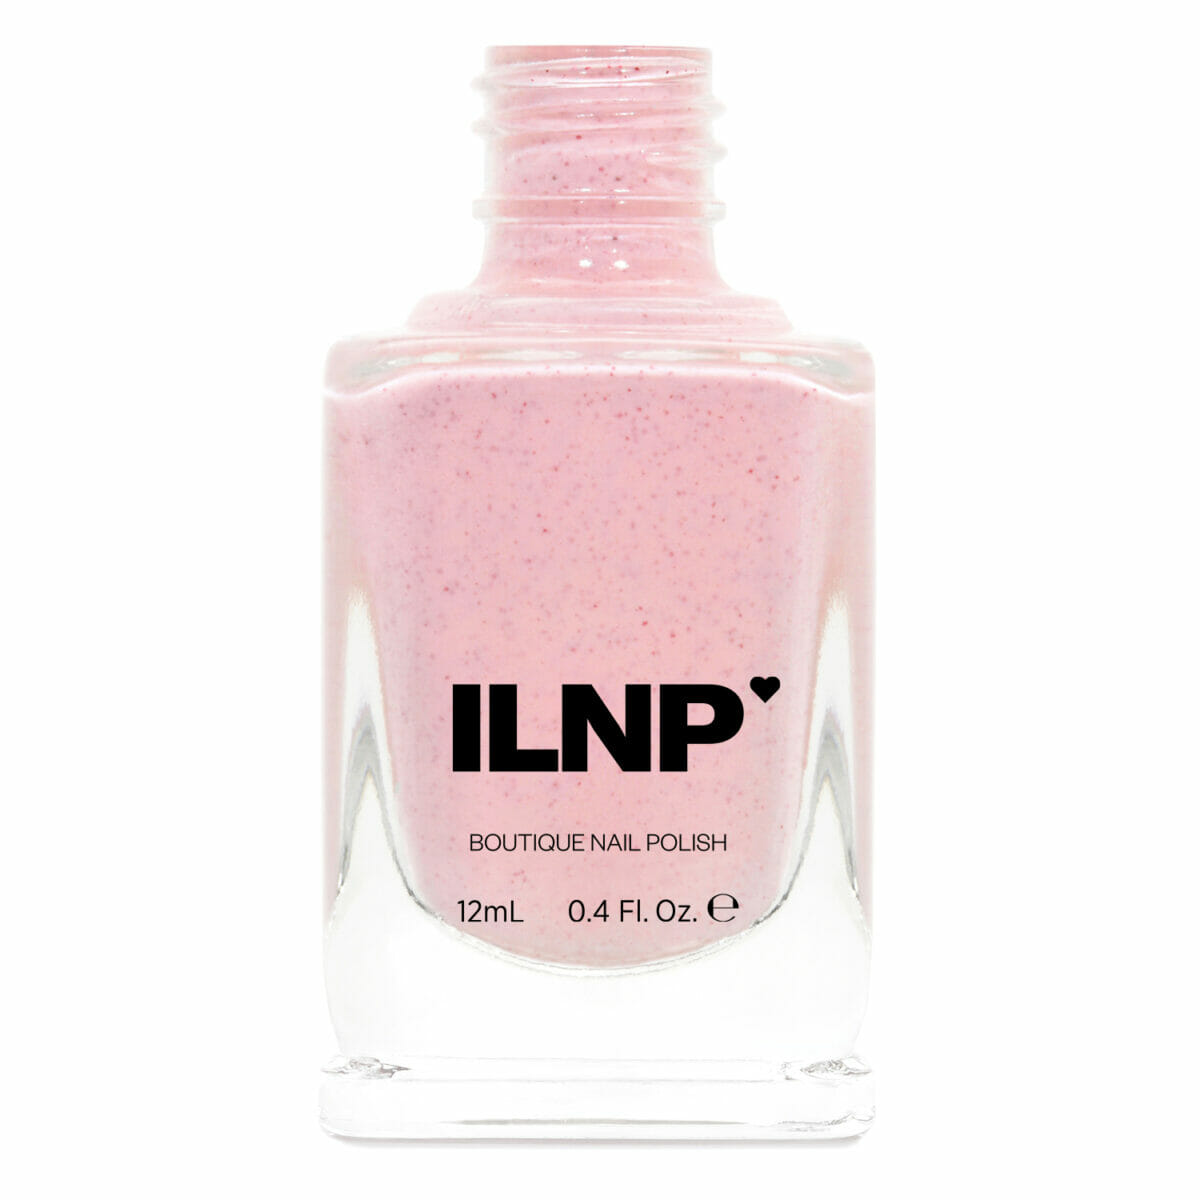 Sunday - Pastel Pink Speckled Nail Polish by ILNP